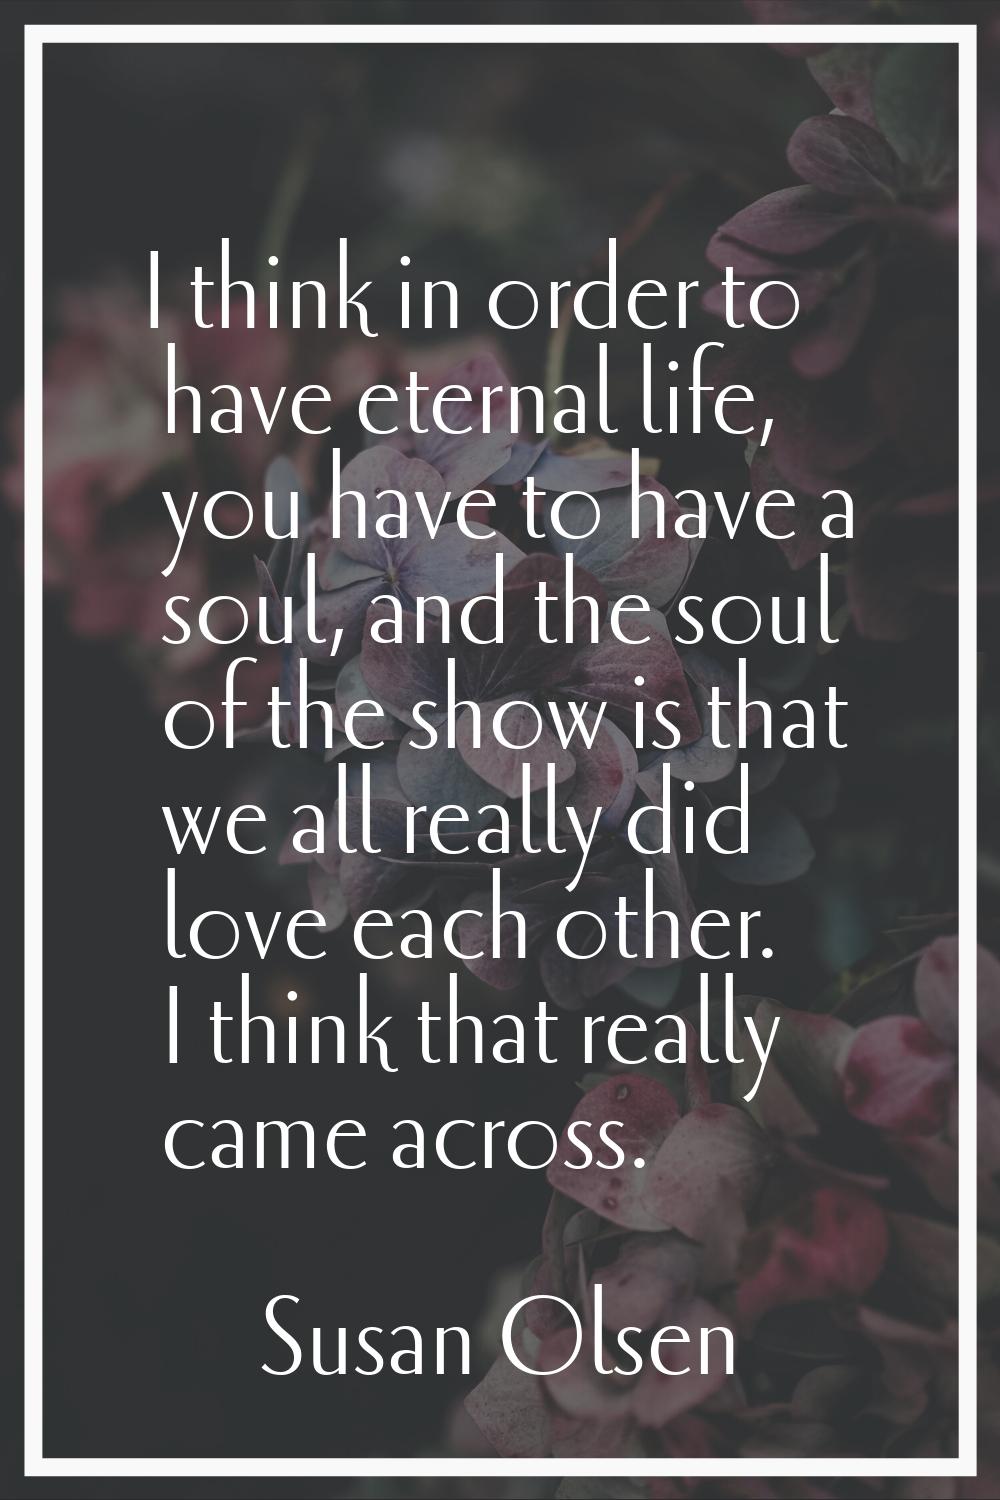 I think in order to have eternal life, you have to have a soul, and the soul of the show is that we